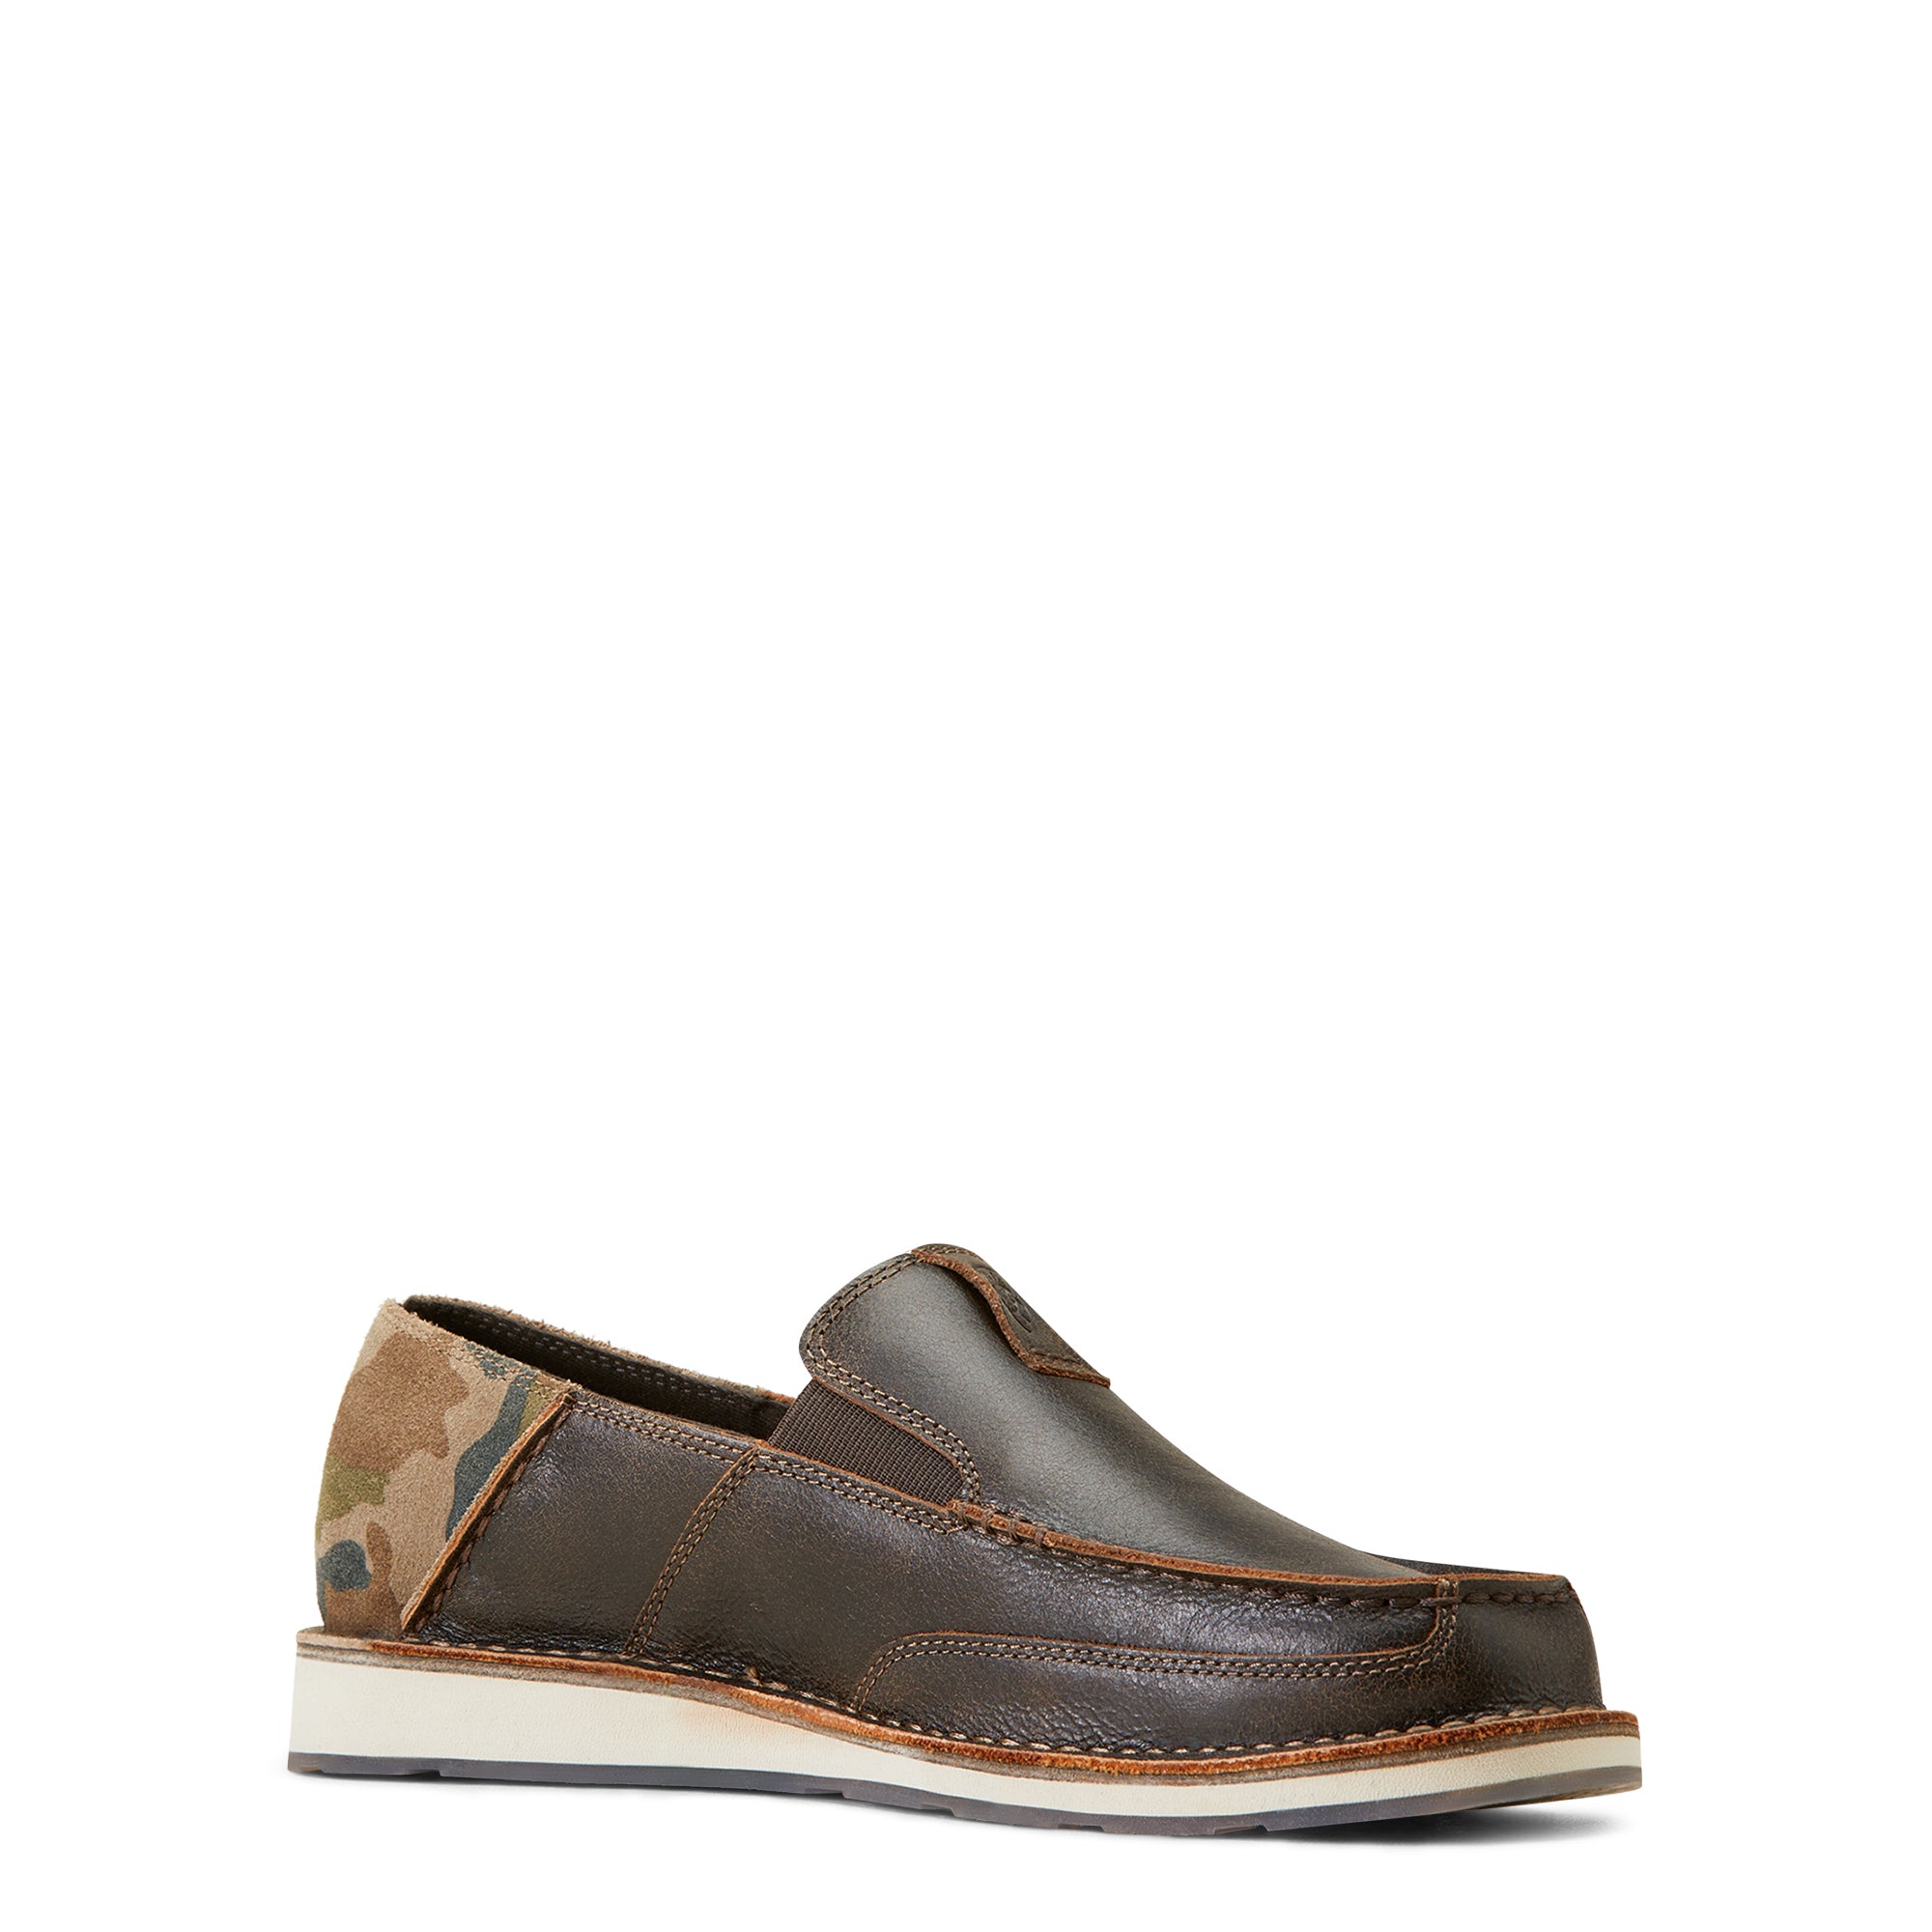 Ariat Mns Cruiser Rich Brown/Casually Camo - Clearance